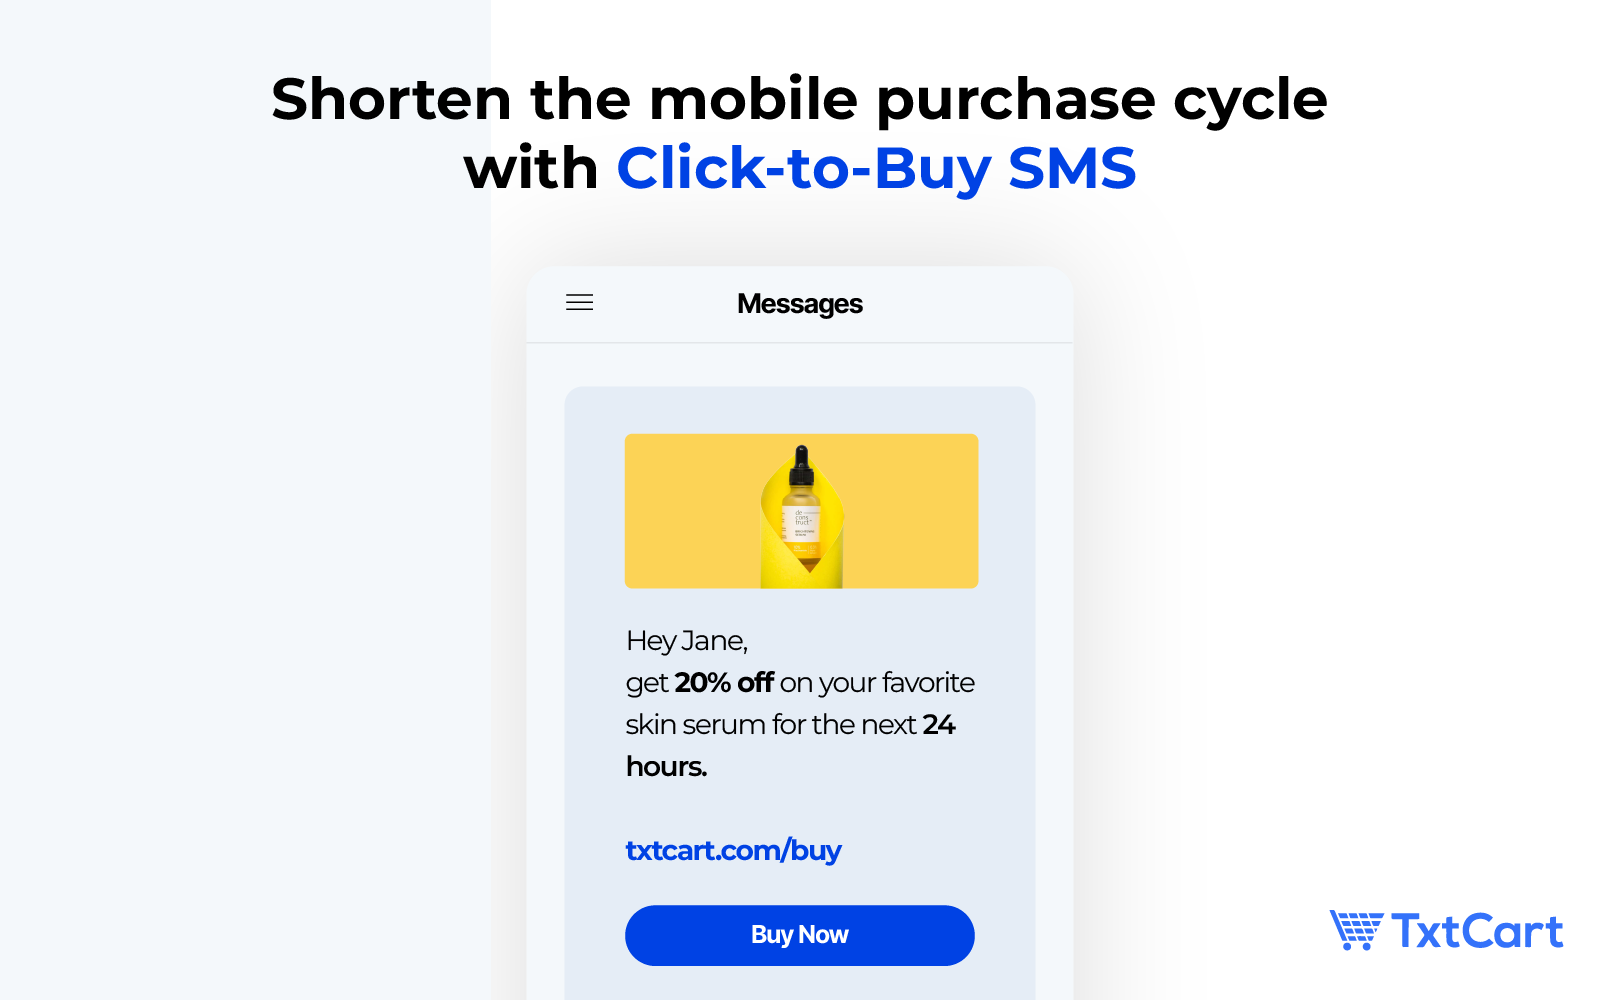 click-to-buy sms